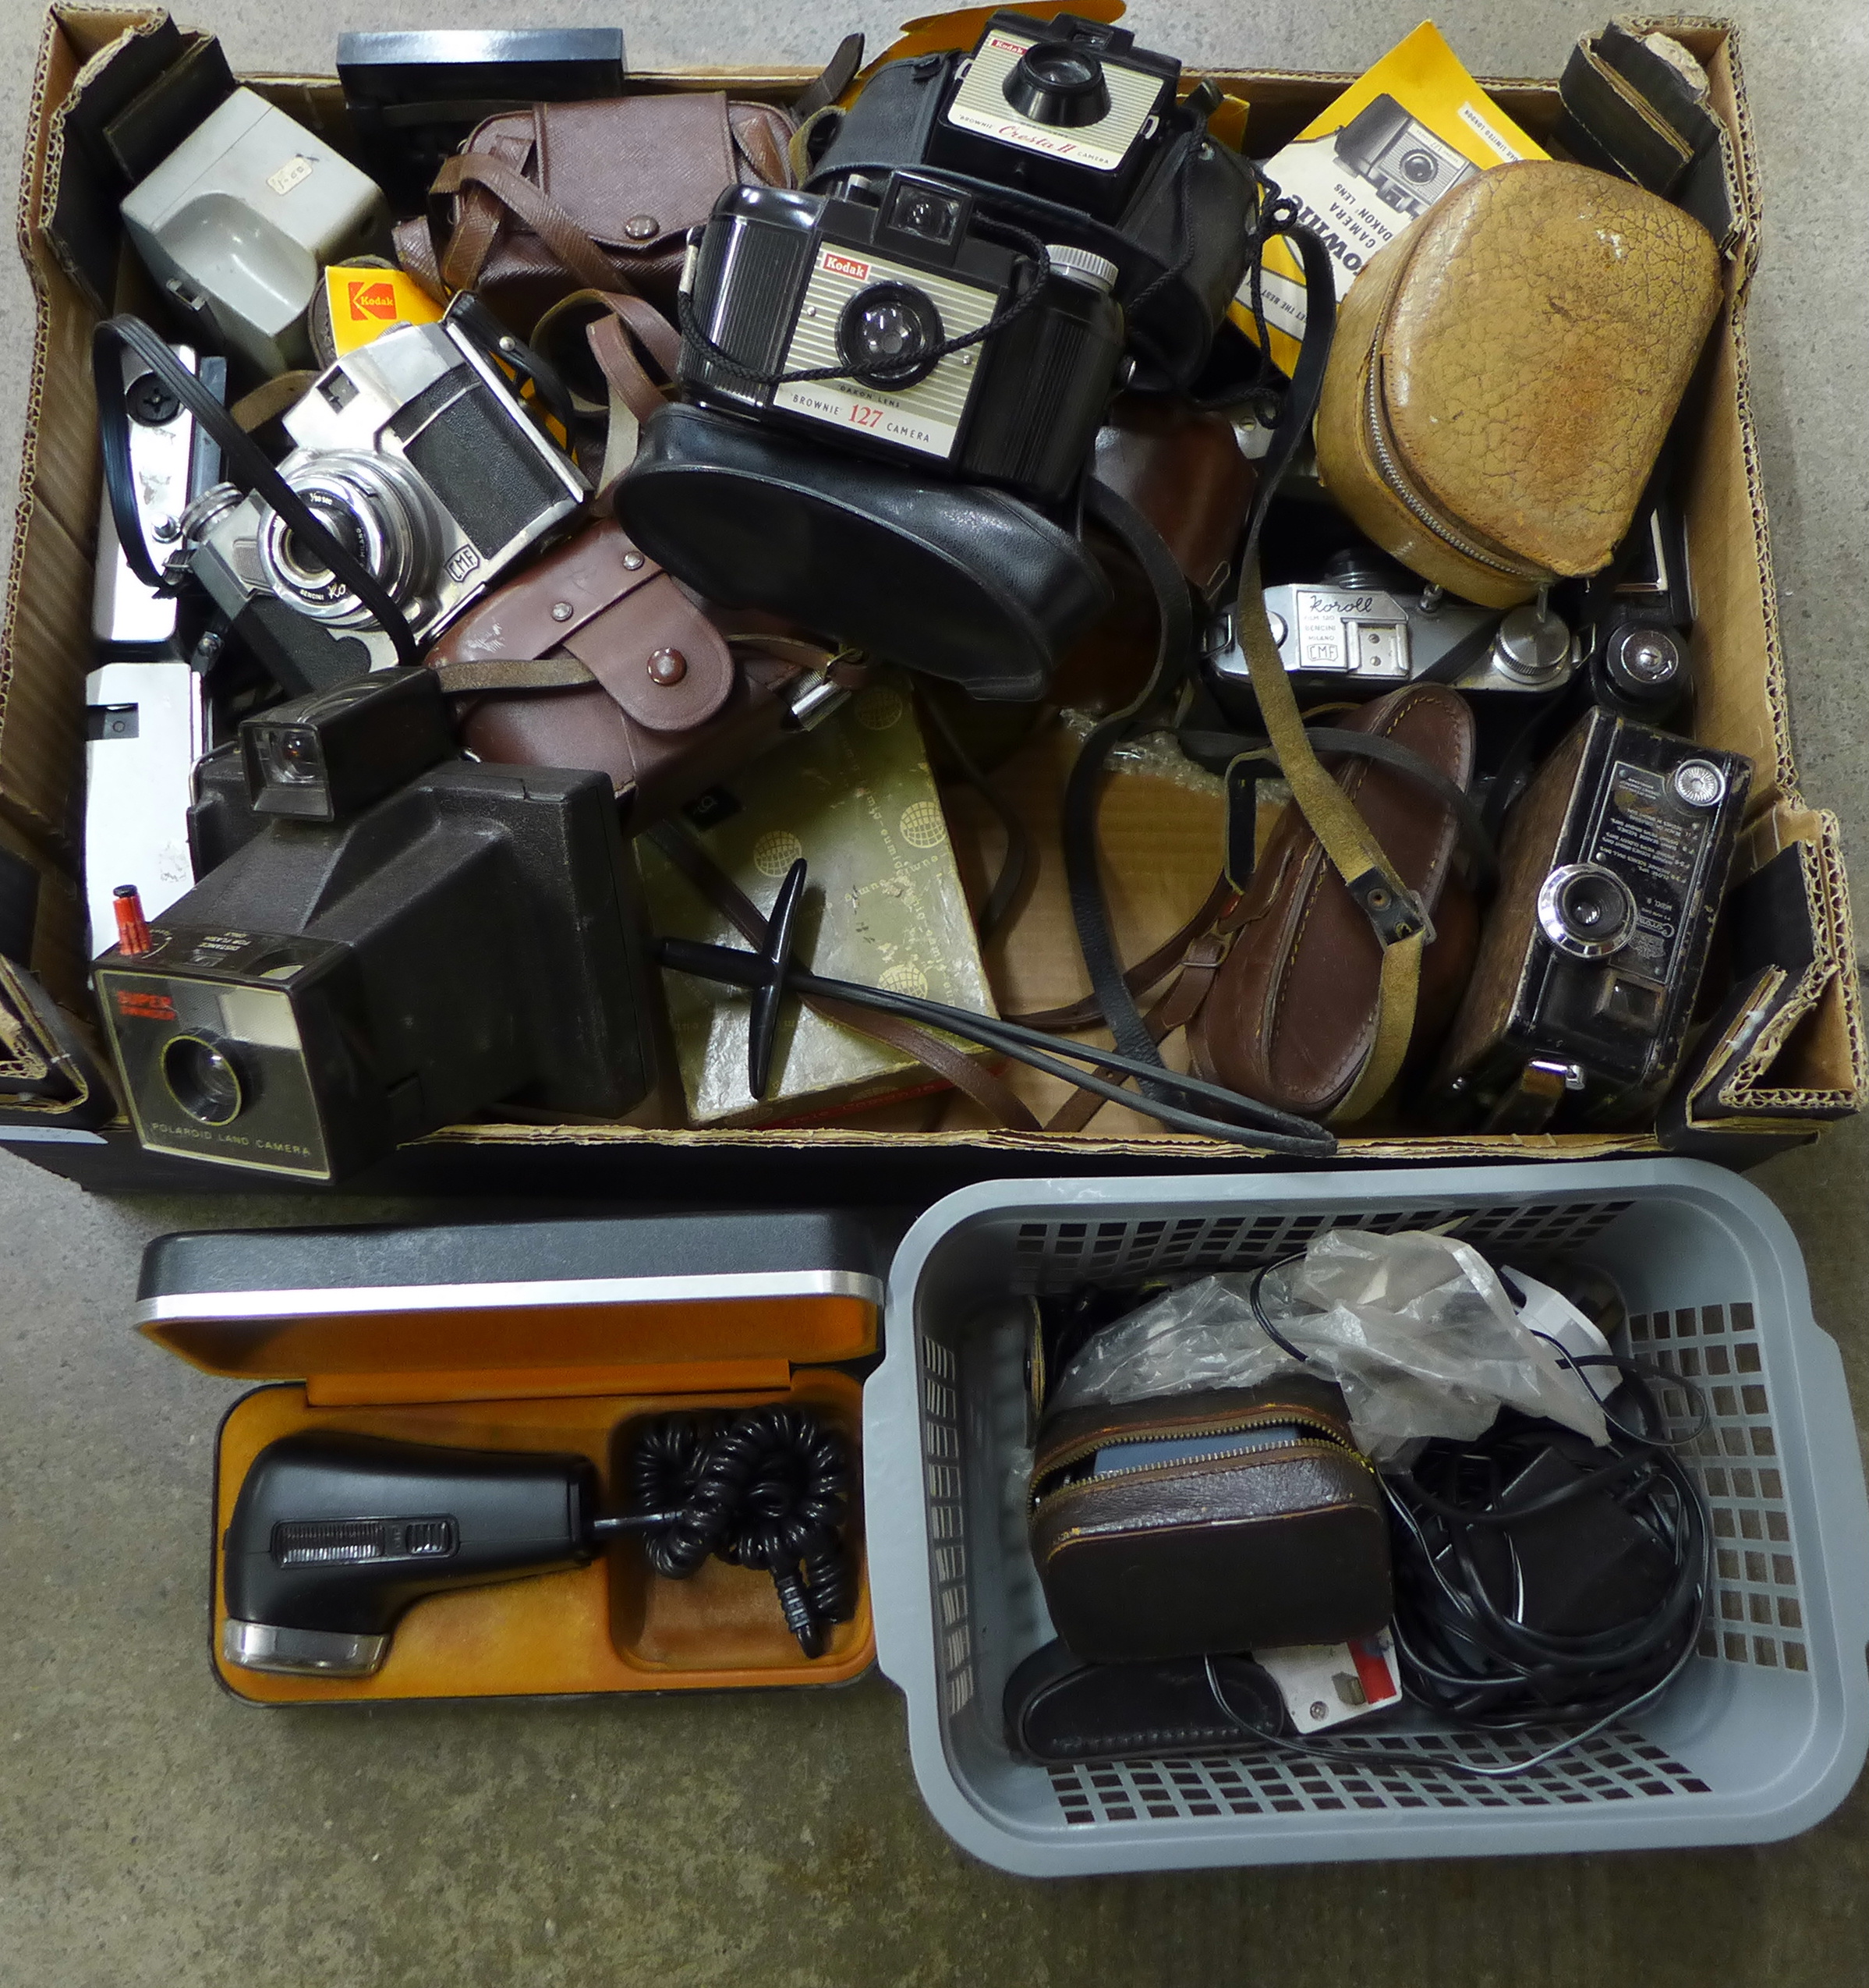 A box of mixed cameras, Covonet Model B, Koroll, etc., and accessories